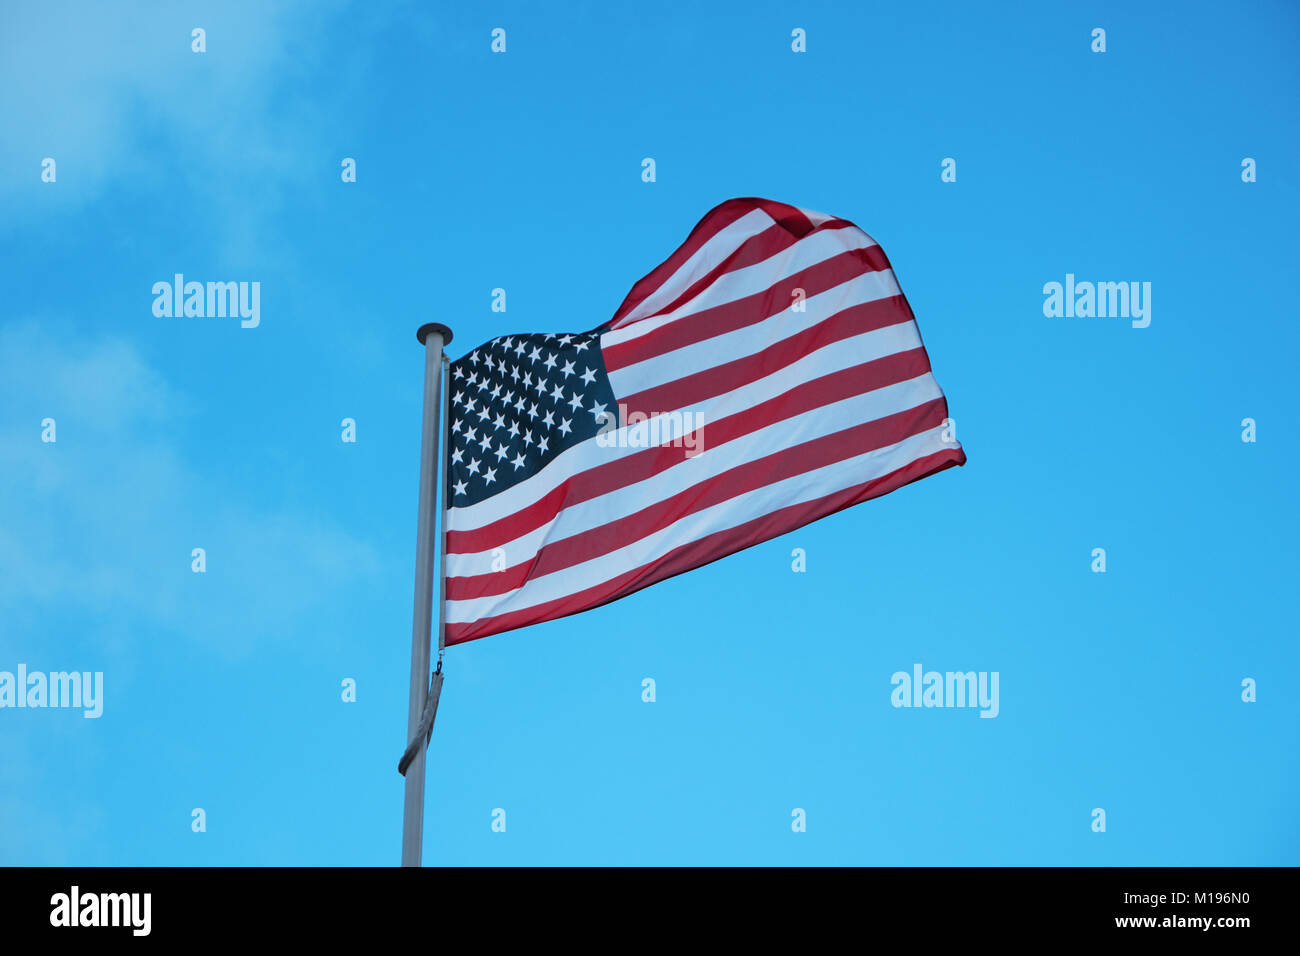 American national official flag on blue sky background. Symbol of the United States. Patriotic US banner, design. Flag of USA on flagpole waving in th Stock Photo